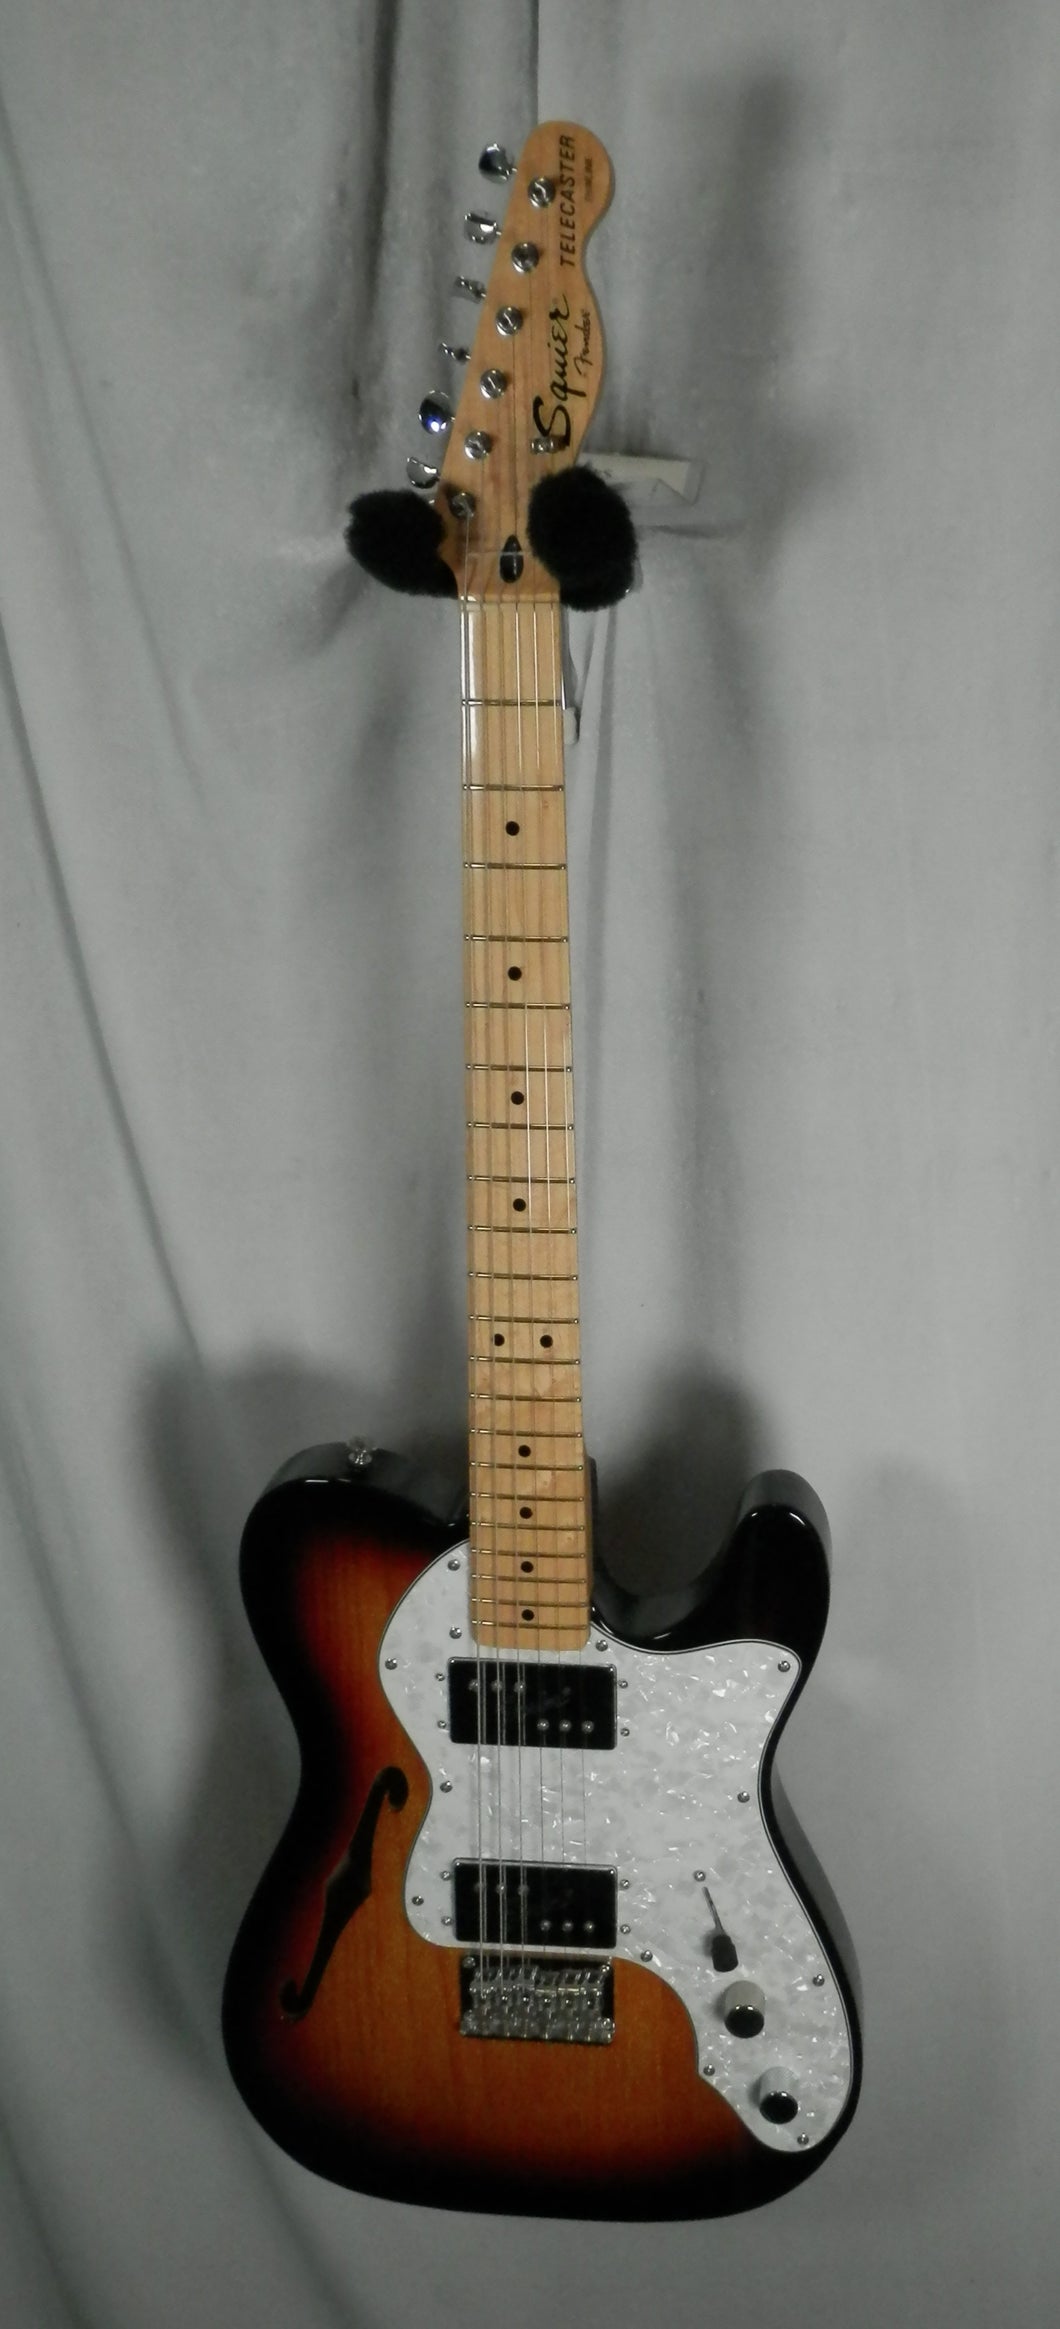 Squier by Fender Thinline Telecaster Sunburst Semi-Hollow electric guitar with gig bag used